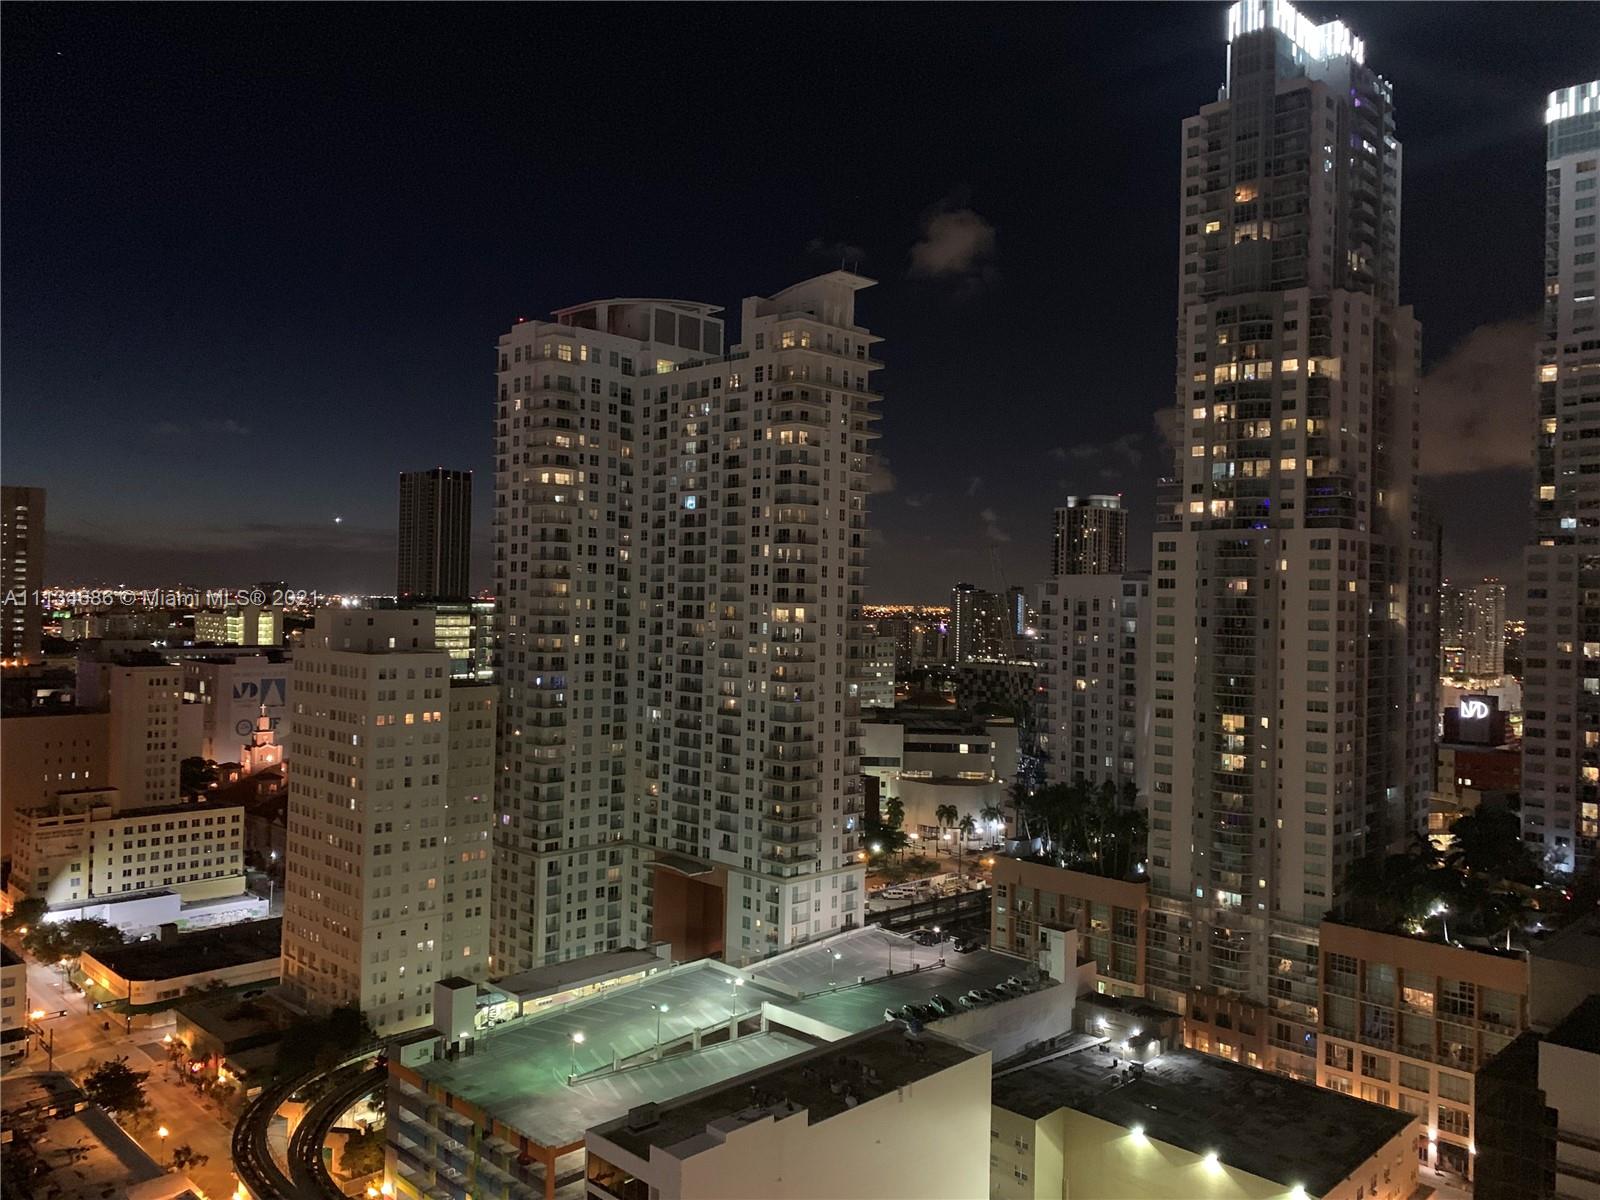 LIVE IN THE MIAMI SKYLINES FAMOUS BUILDING! 
1 BEDROOM 1 BATH + DEN 1 PARKING SPACE, KITCHEN COME EQUIPPED WITH BOSCH APPLIANCES AND CUSTOM BACKSPLASH, FIRST CLASS AMENITIES, GYM, OLYMPIC SIZE POOL, PARTY ROOMS, SPA... VALET PARKING 24/7, AMAZING CITY VIEW.
LOCATED IN MIAMI'S LIFESTYLE EPICENTER,WALKING TO THE ARTS + CULTURE NEARBY SUCH A BAYSIDE MARKETPLACE, PEREZ ART MUSEUM, AND AAA ARENA.